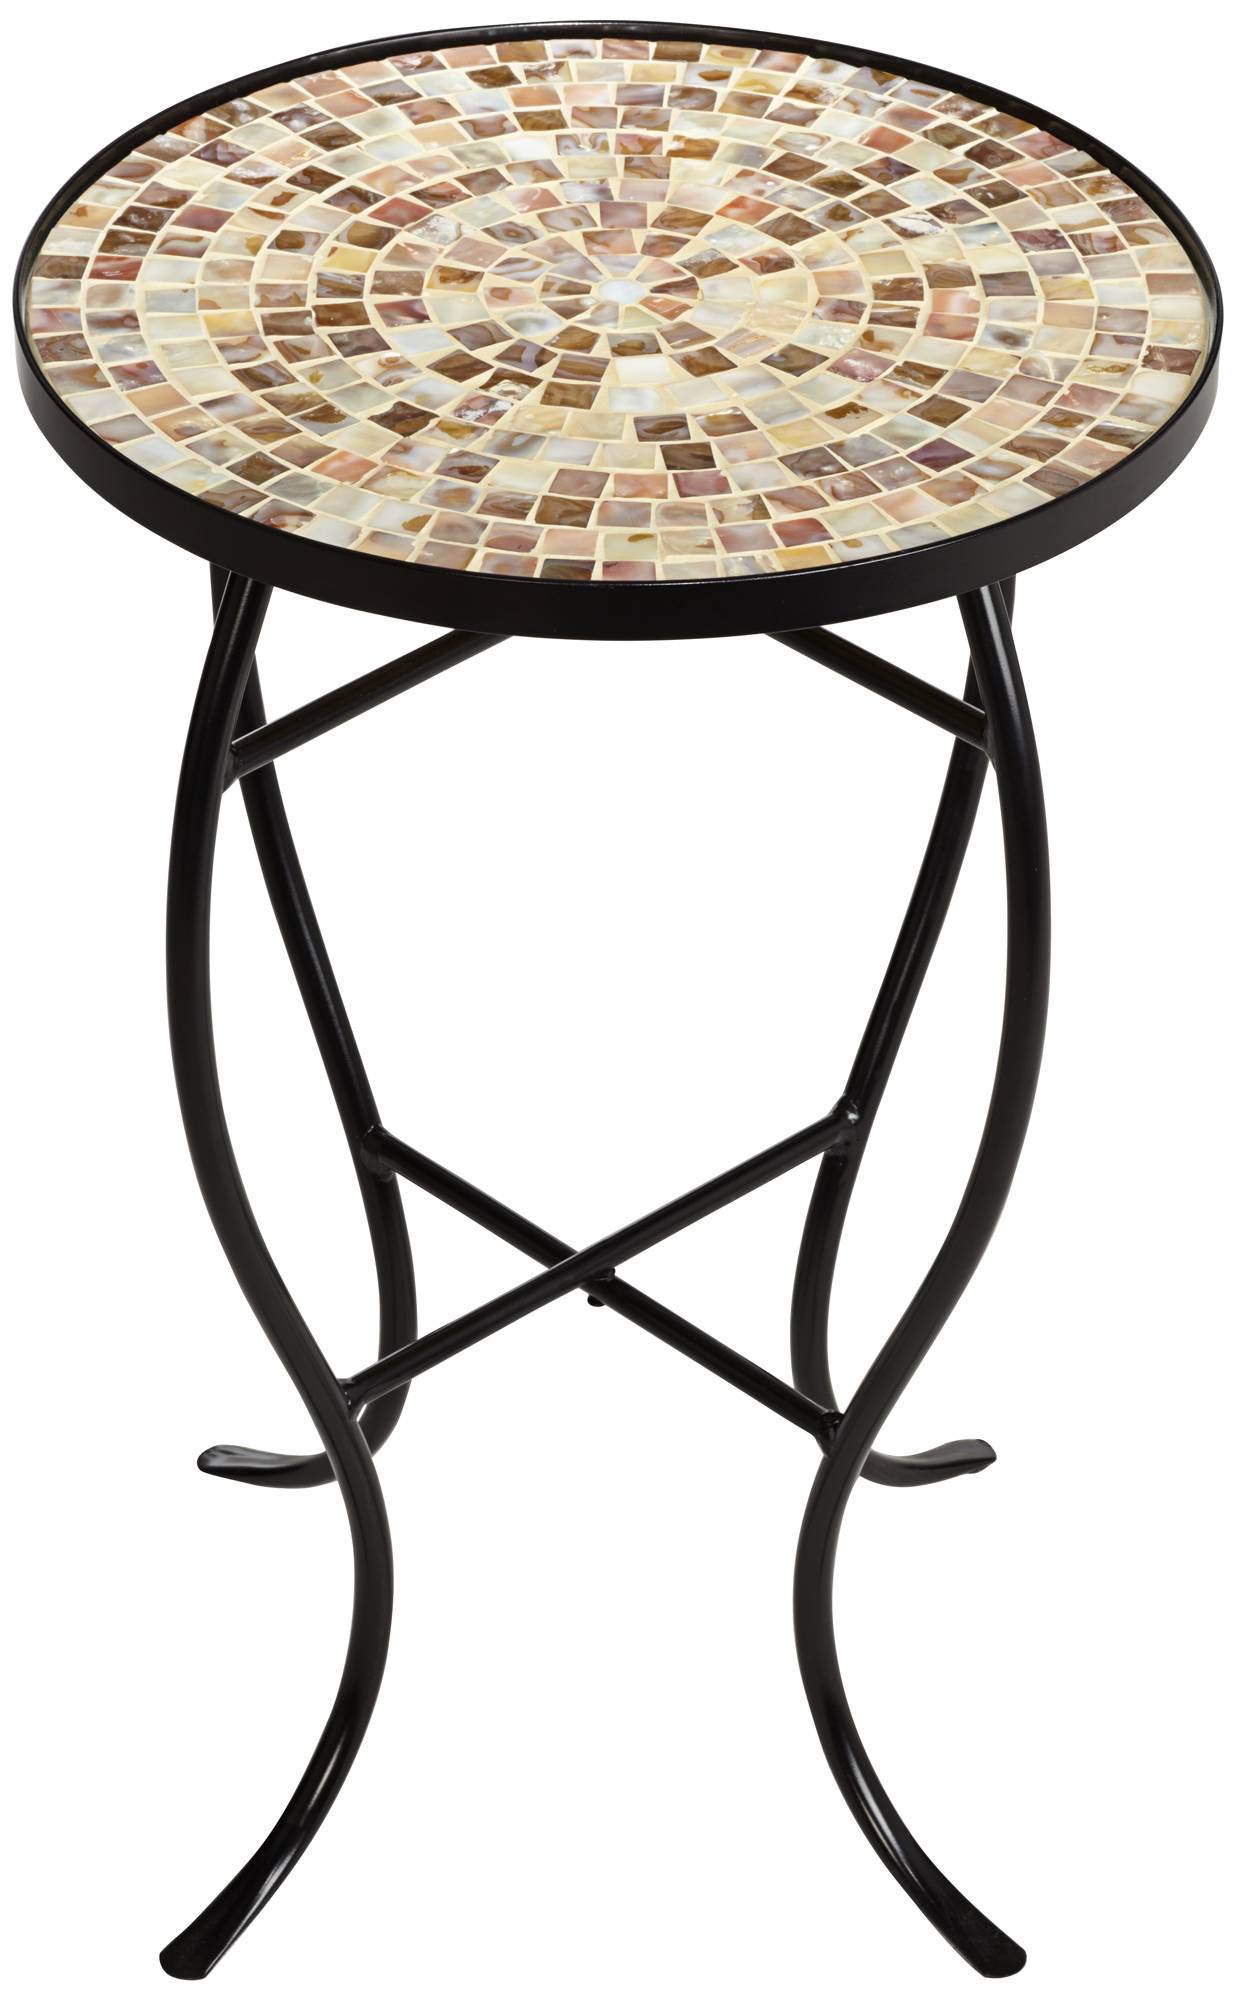 Teal Island Designs Mother of Pearl Modern Black Metal Round Outdoor Accent Side Table 14" Wide Natural Mosaic Tile Tabletop Gracefully Curved Legs for Spaces Porch Patio Home House Balcony Deck